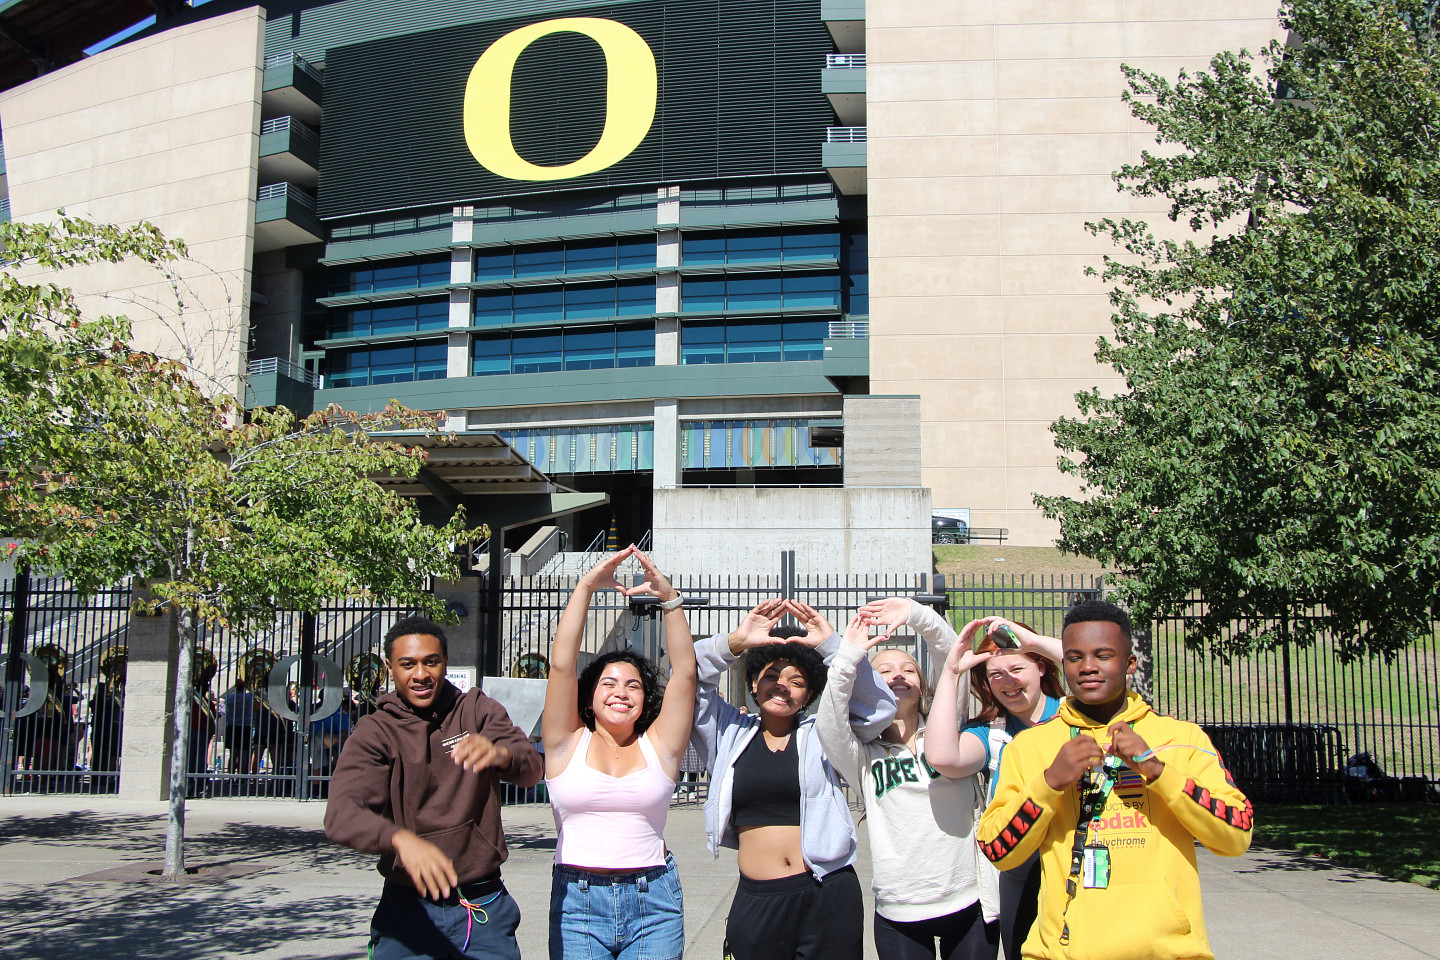 2023 NSFR Students put up an "O' in from of Autzen Stadium